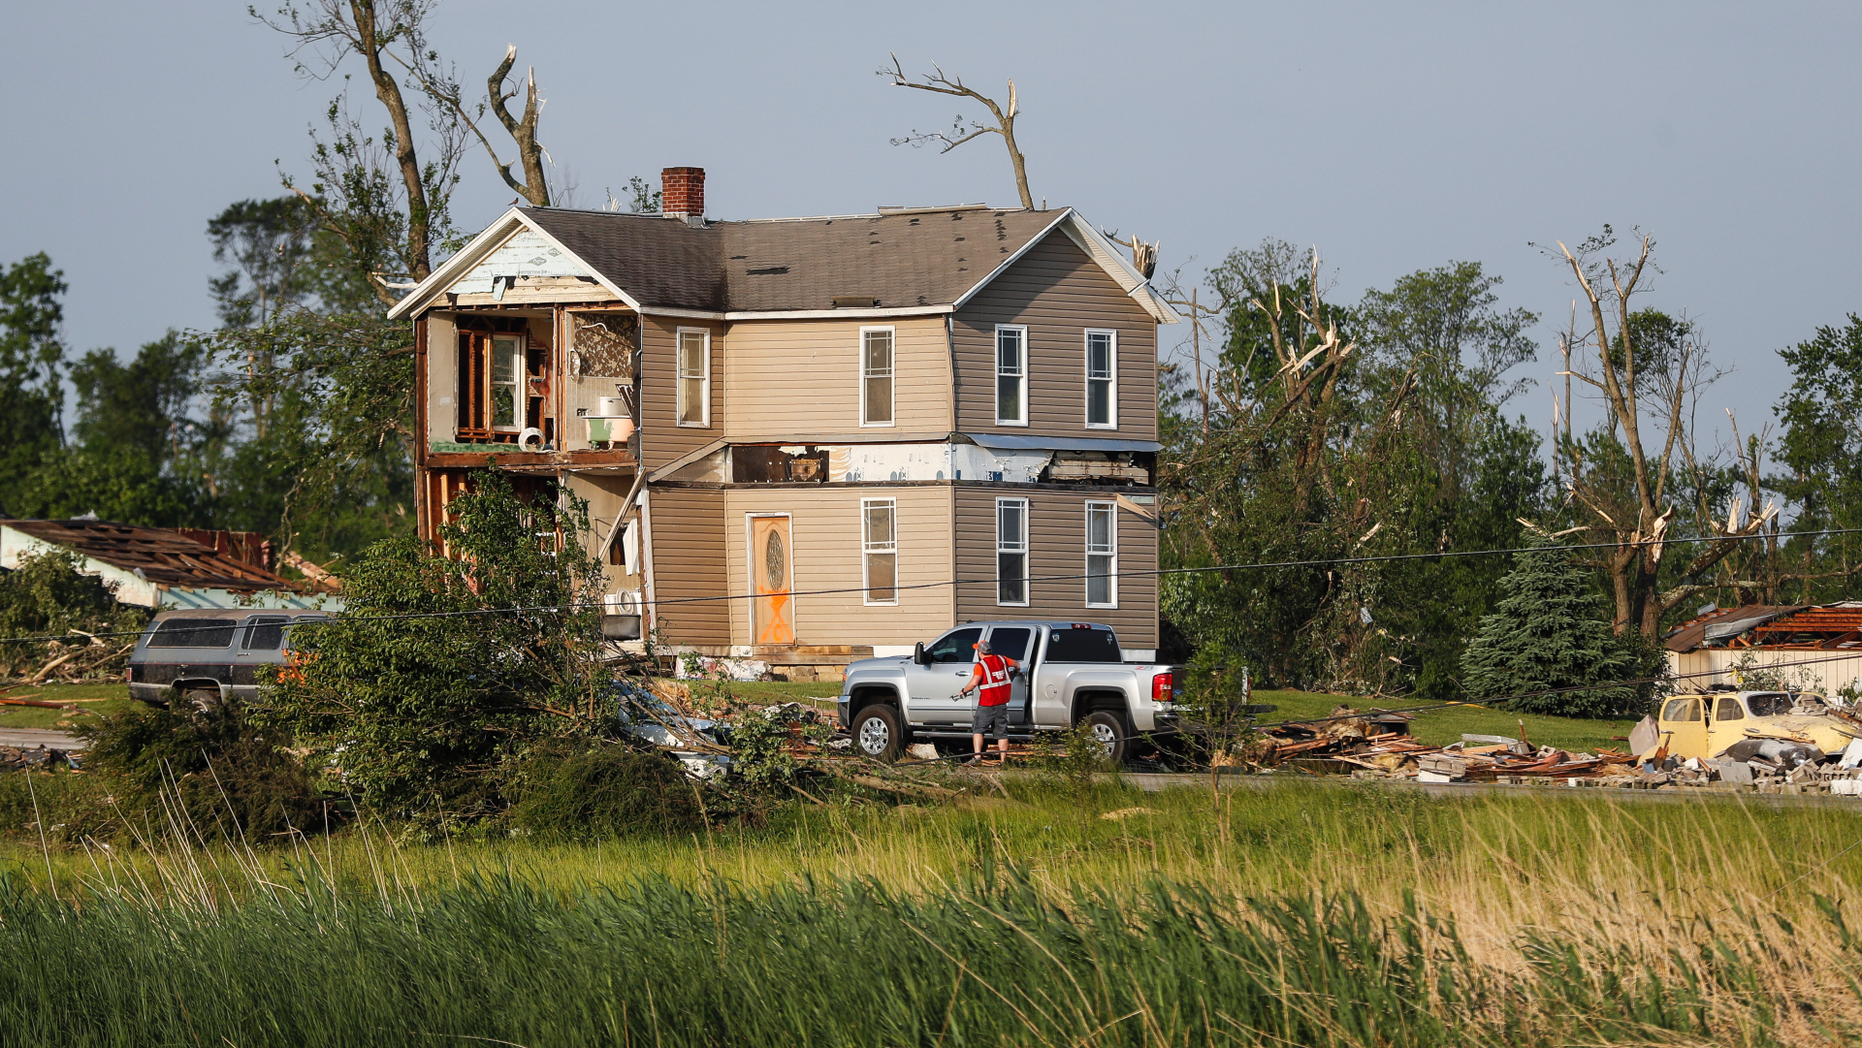 Homes stand damaged after a tornado passed through the area the previous evening, Tuesday, May 28, 2019, in Brookville, Ohio. (AP Photo/John Minchillo)